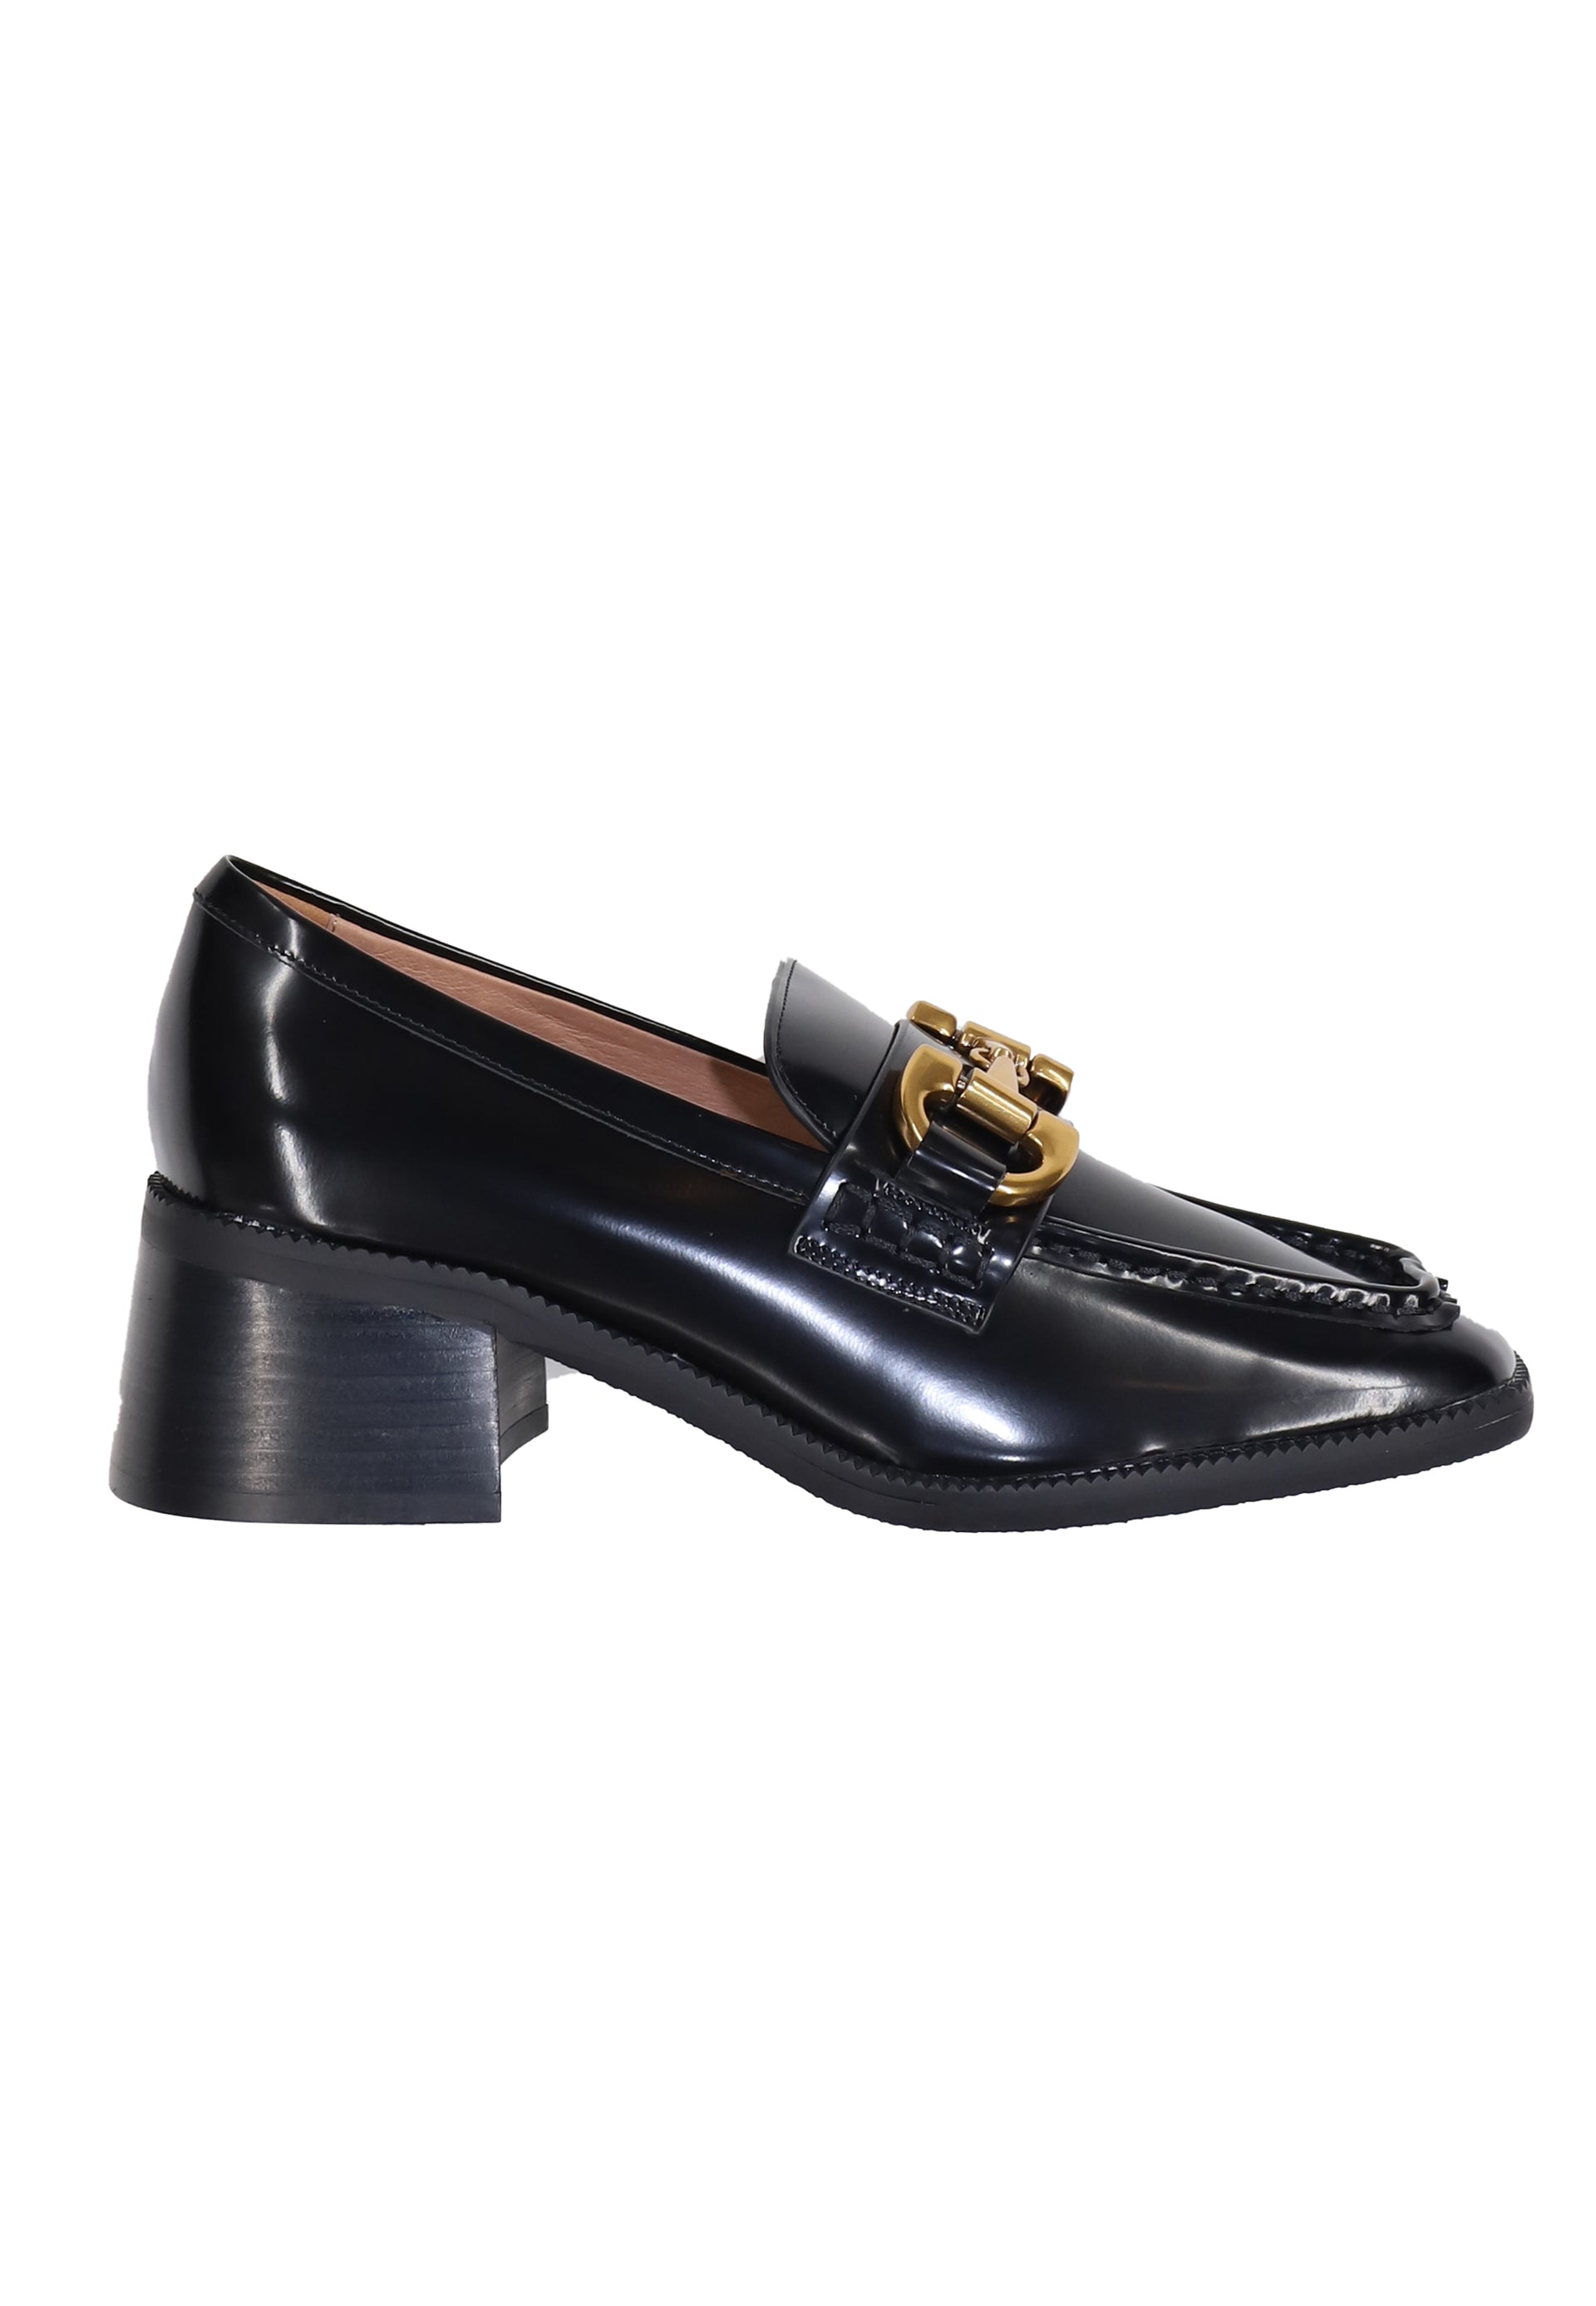 Women's moccasins in shiny black leather with gold clamp Tiana